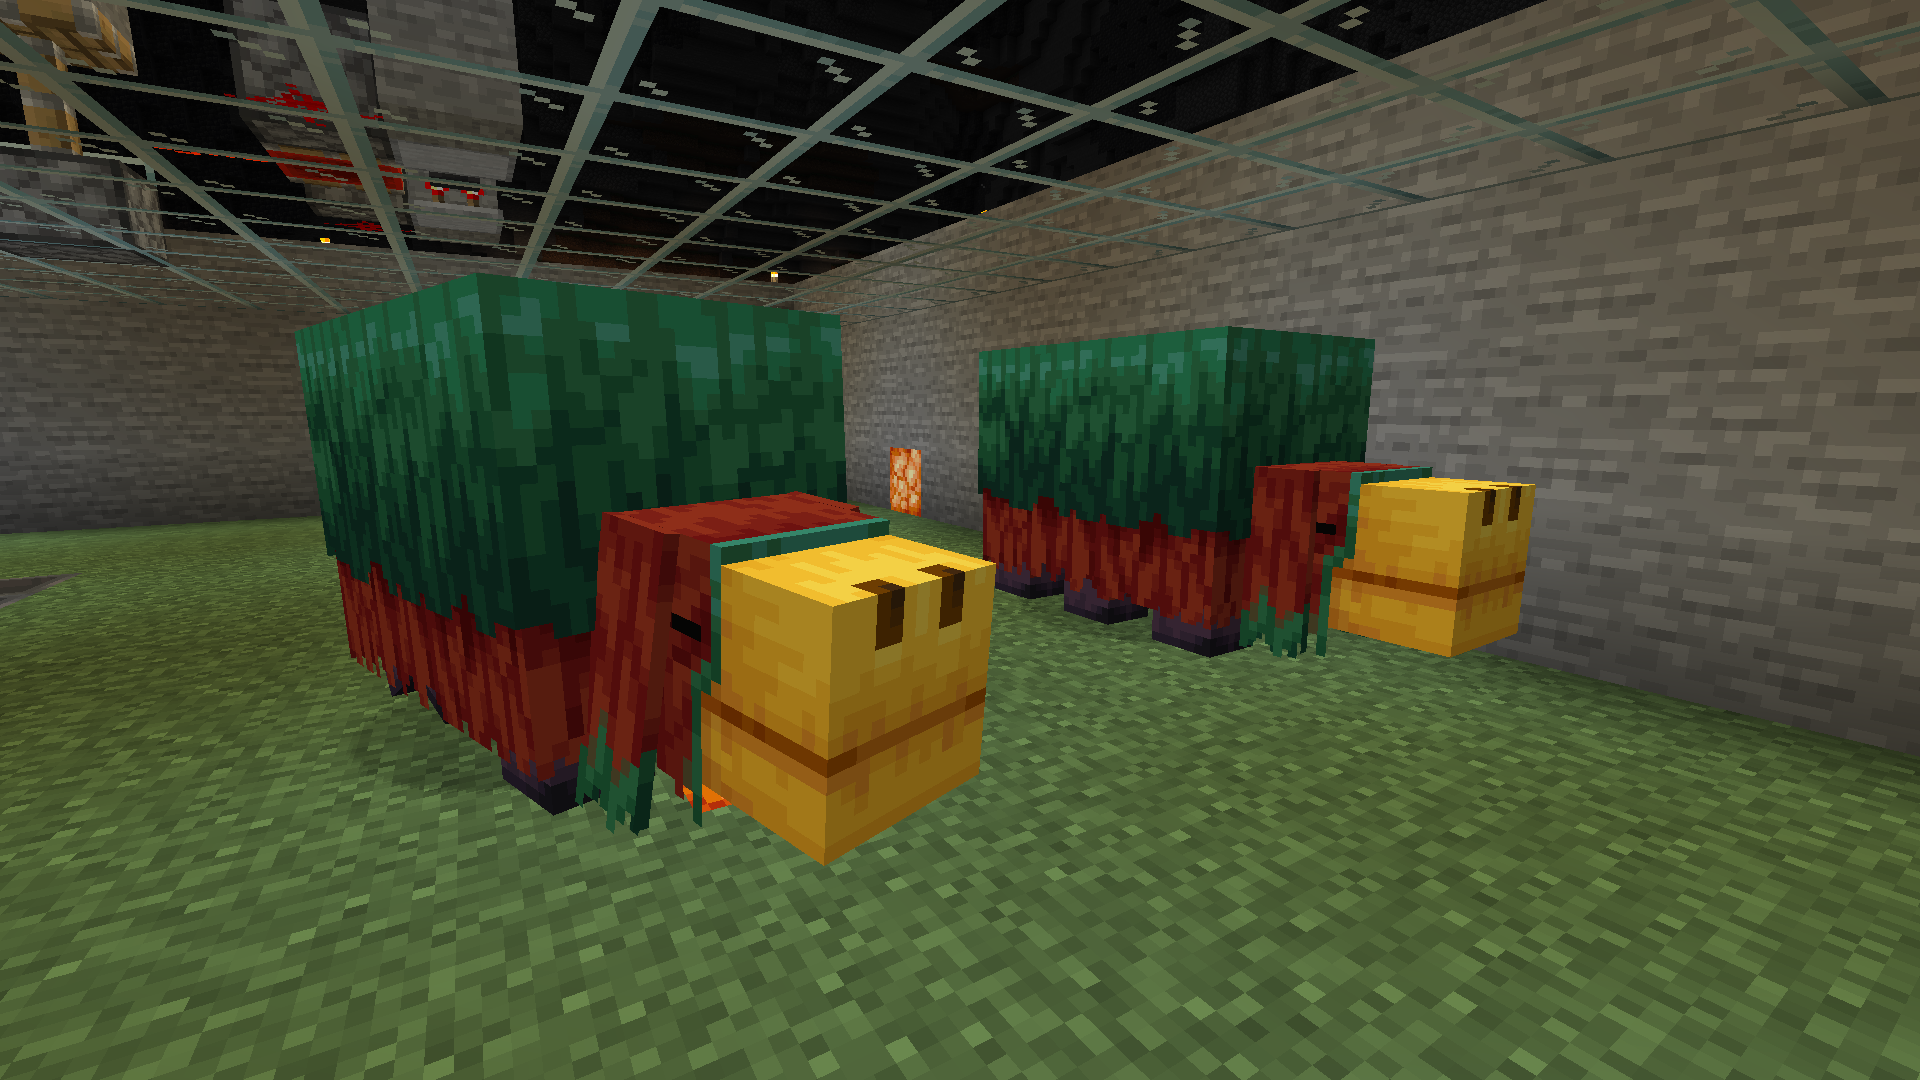 A screenshot of two sniffers. They are large green and red creates with a yellow face.